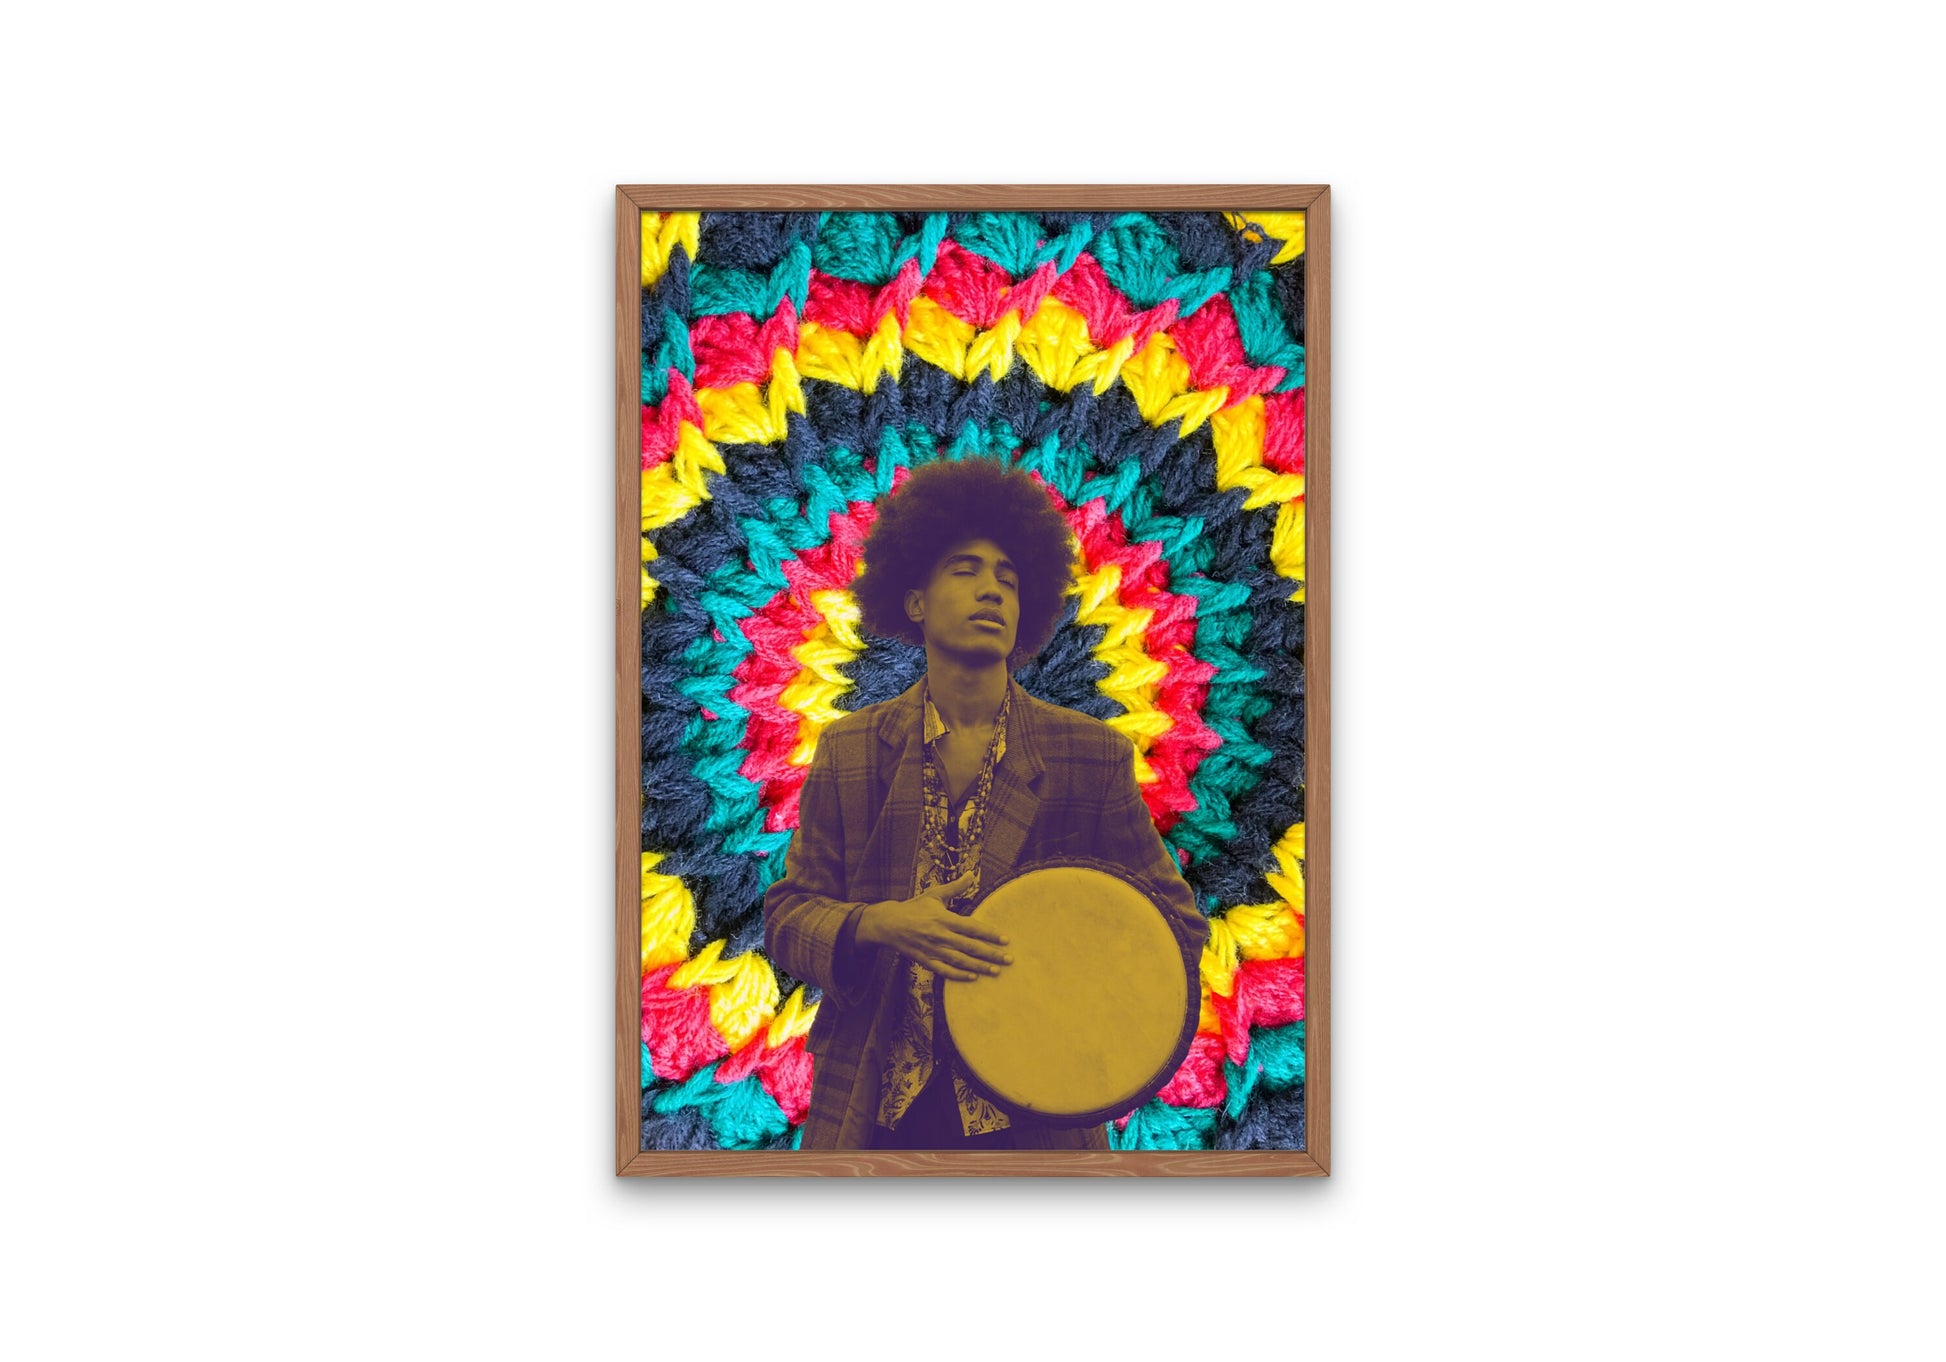 Hippie Guy Wall Print INSTANT DOWNLOAD, Flower power décor, hippie poster, 70s Wall Art, Colorful Art, trippy painting, Bob Marley inspired